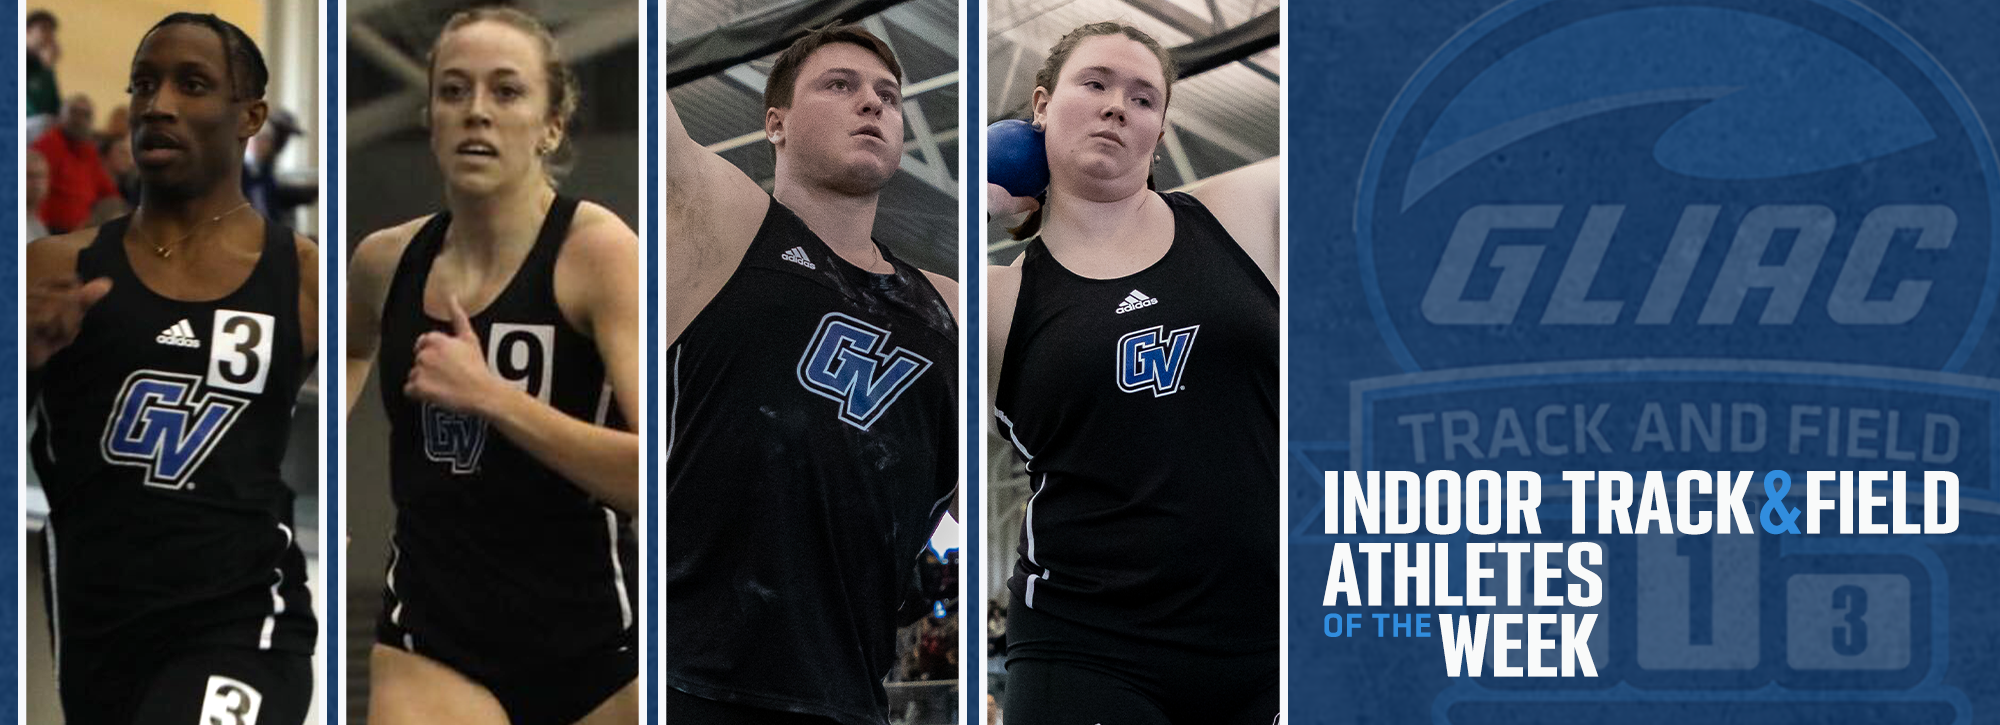 GLIAC recognizes indoor track & field athletes of the week